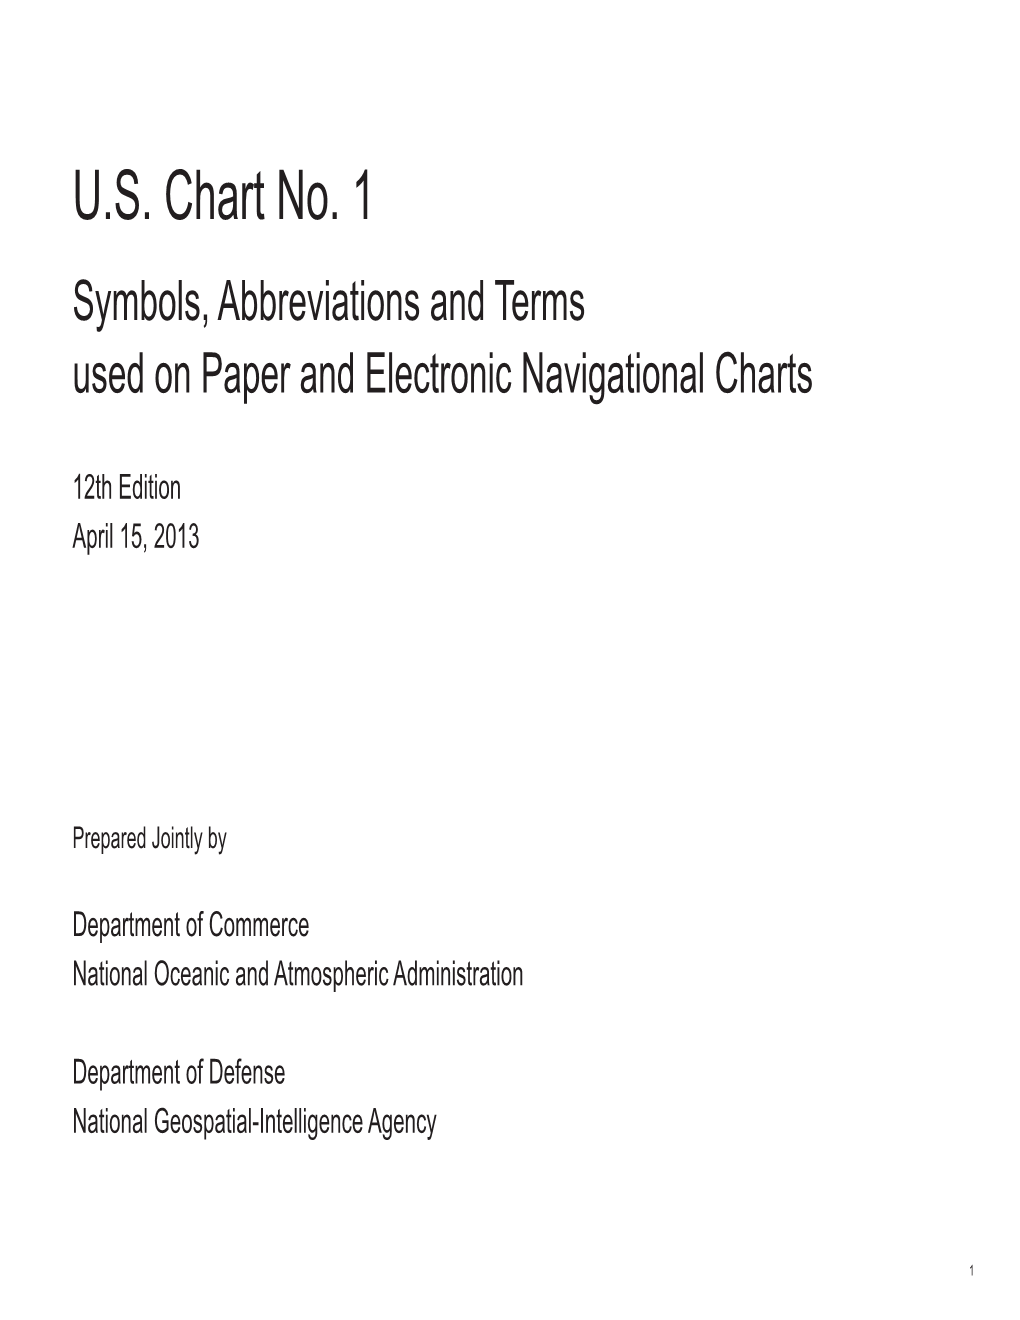 U.S. Chart No. 1 Symbols, Abbreviations and Terms Used on Paper and Electronic Navigational Charts